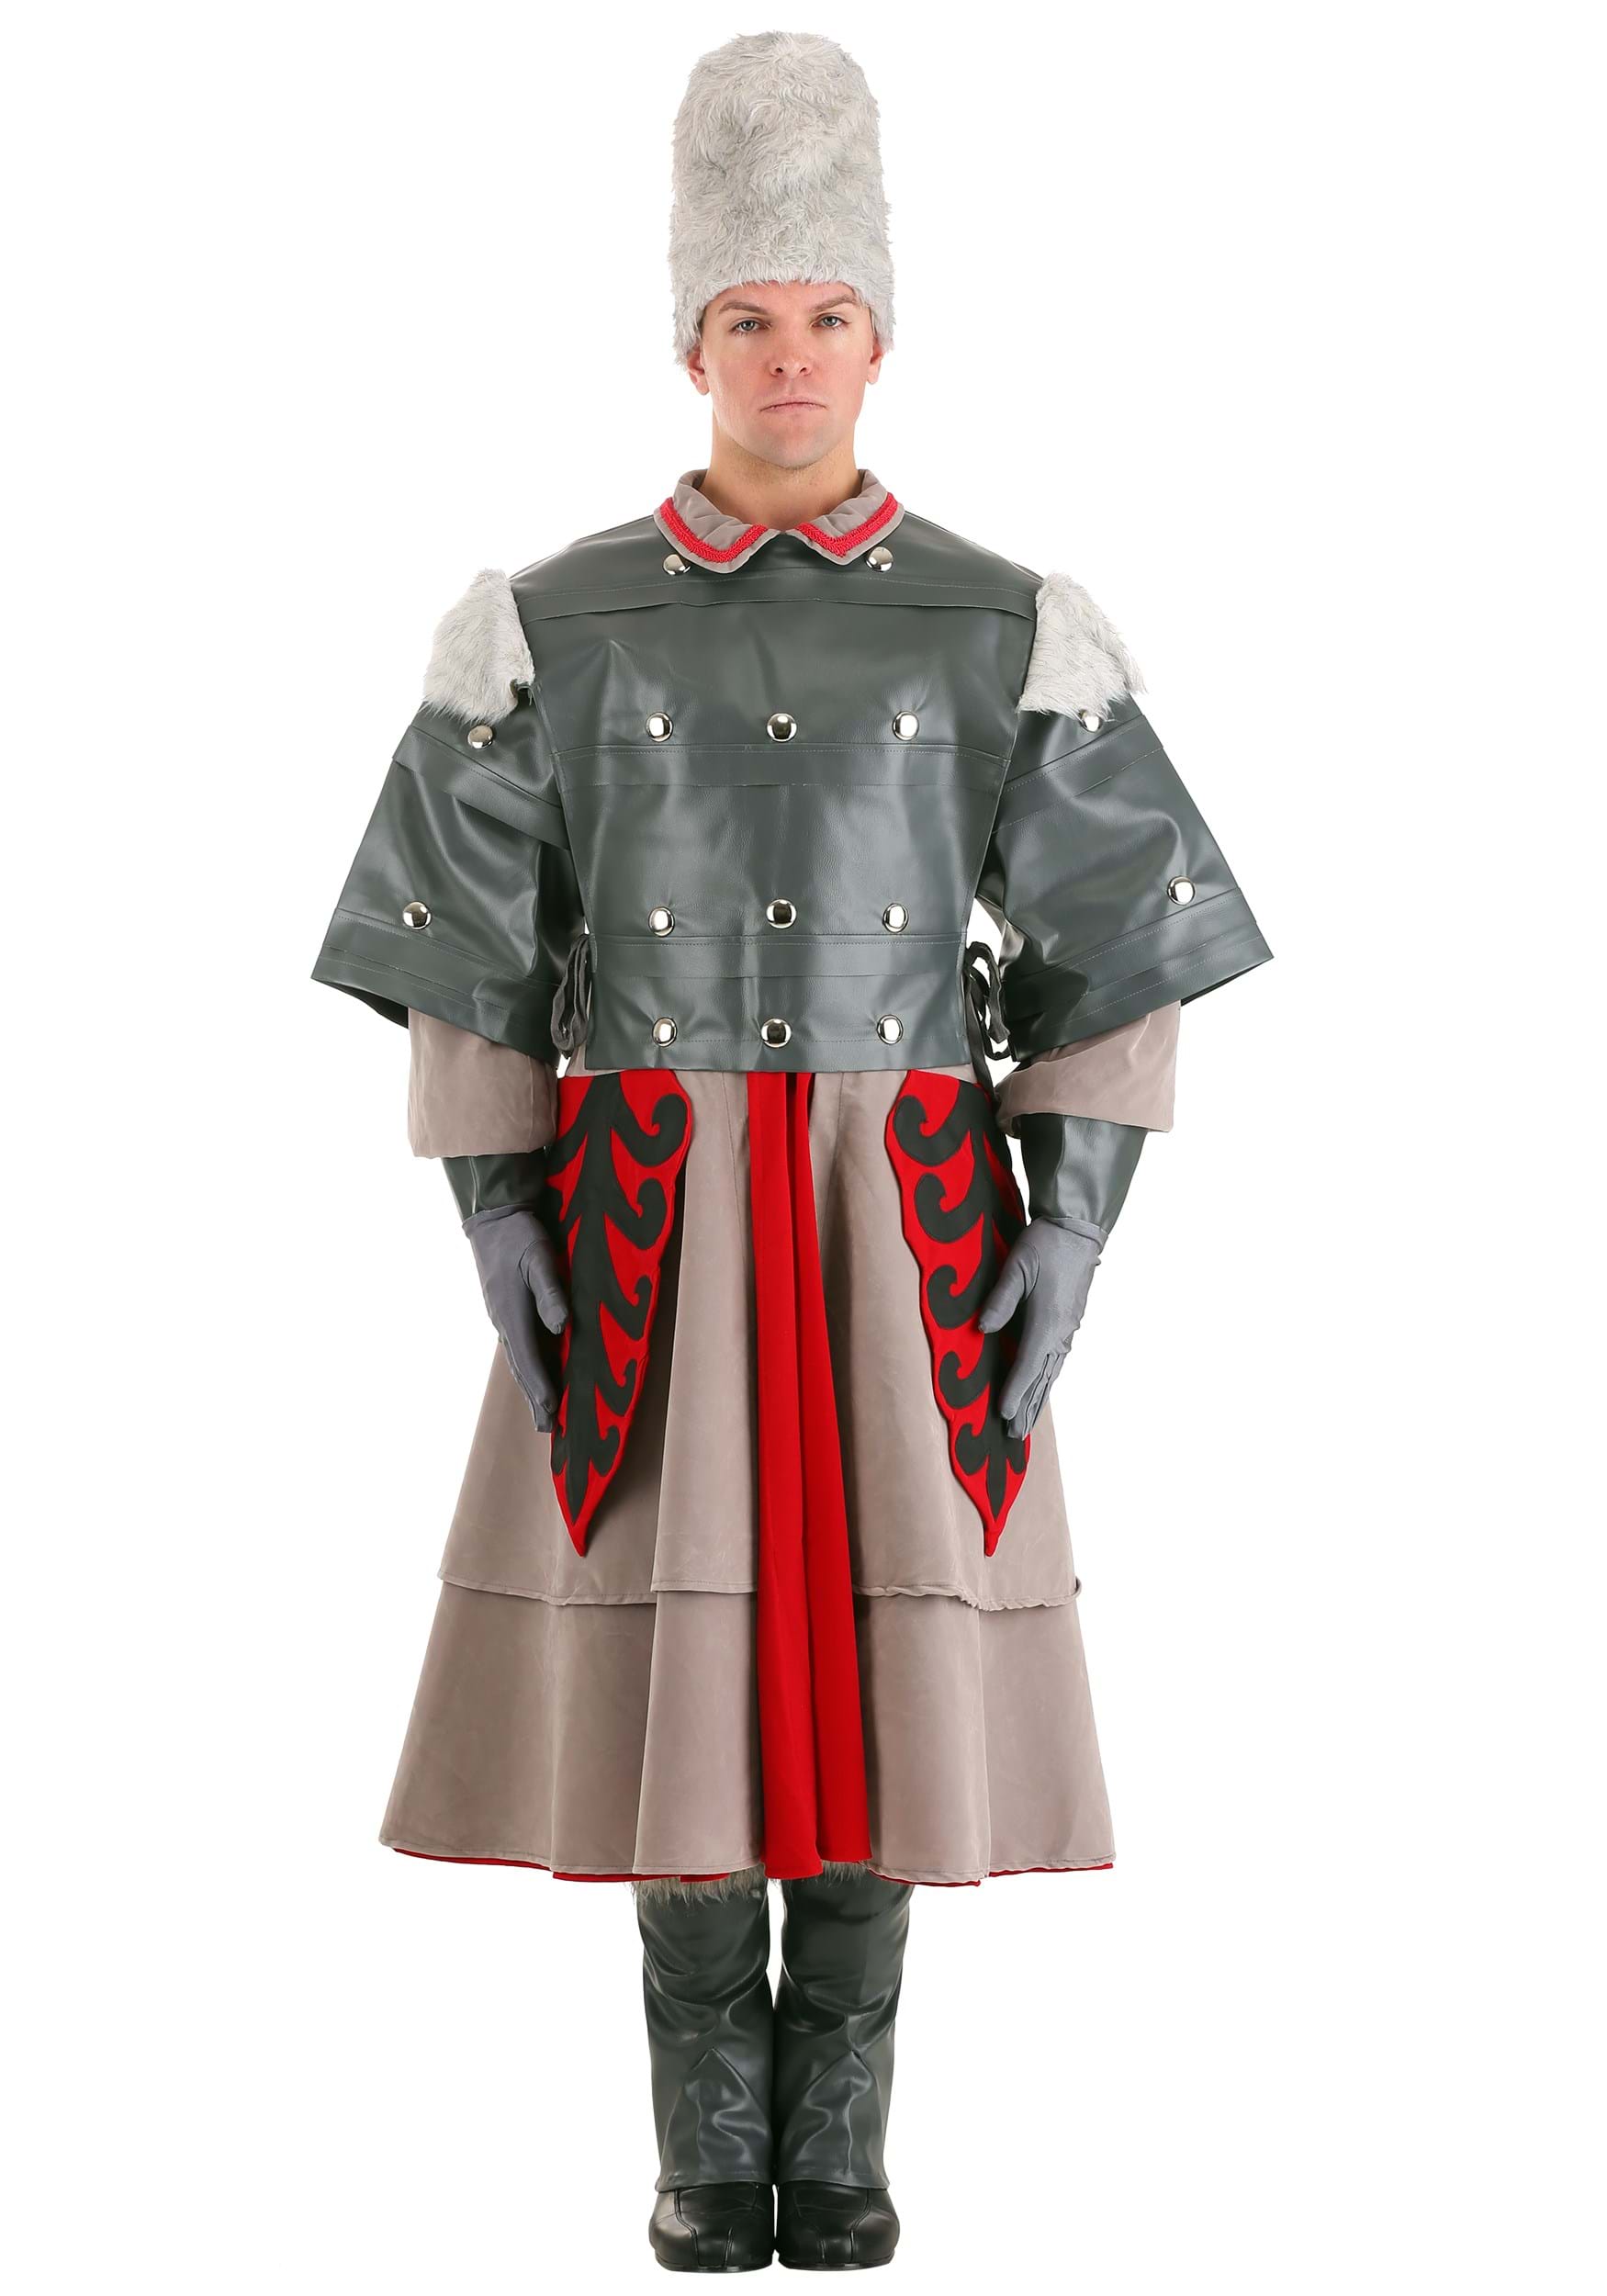 Image of Adult Deluxe Witch Guard Costume | Wizard of Oz Costumes ID FUN0050-XL